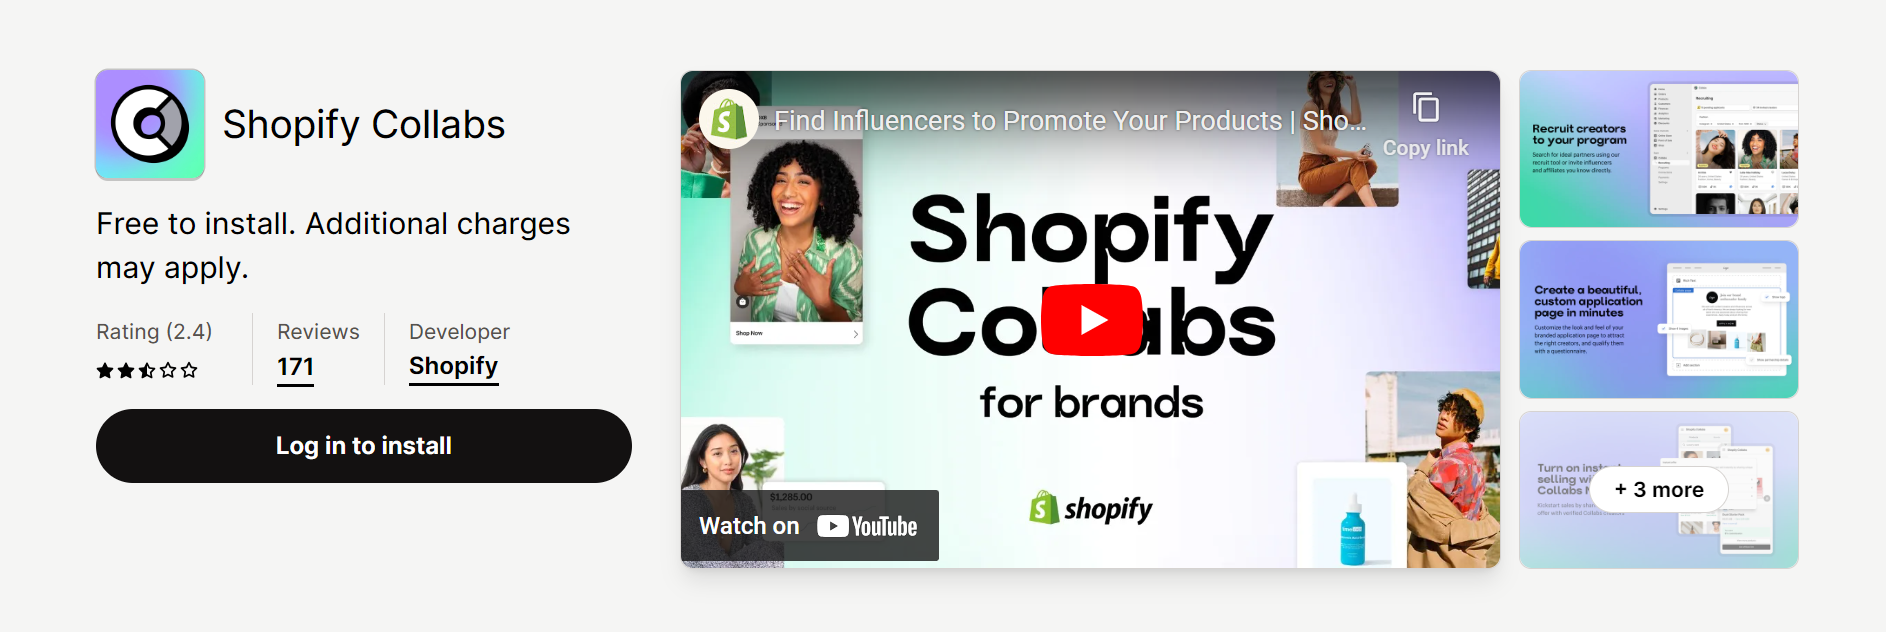 About Shopify Collabs App